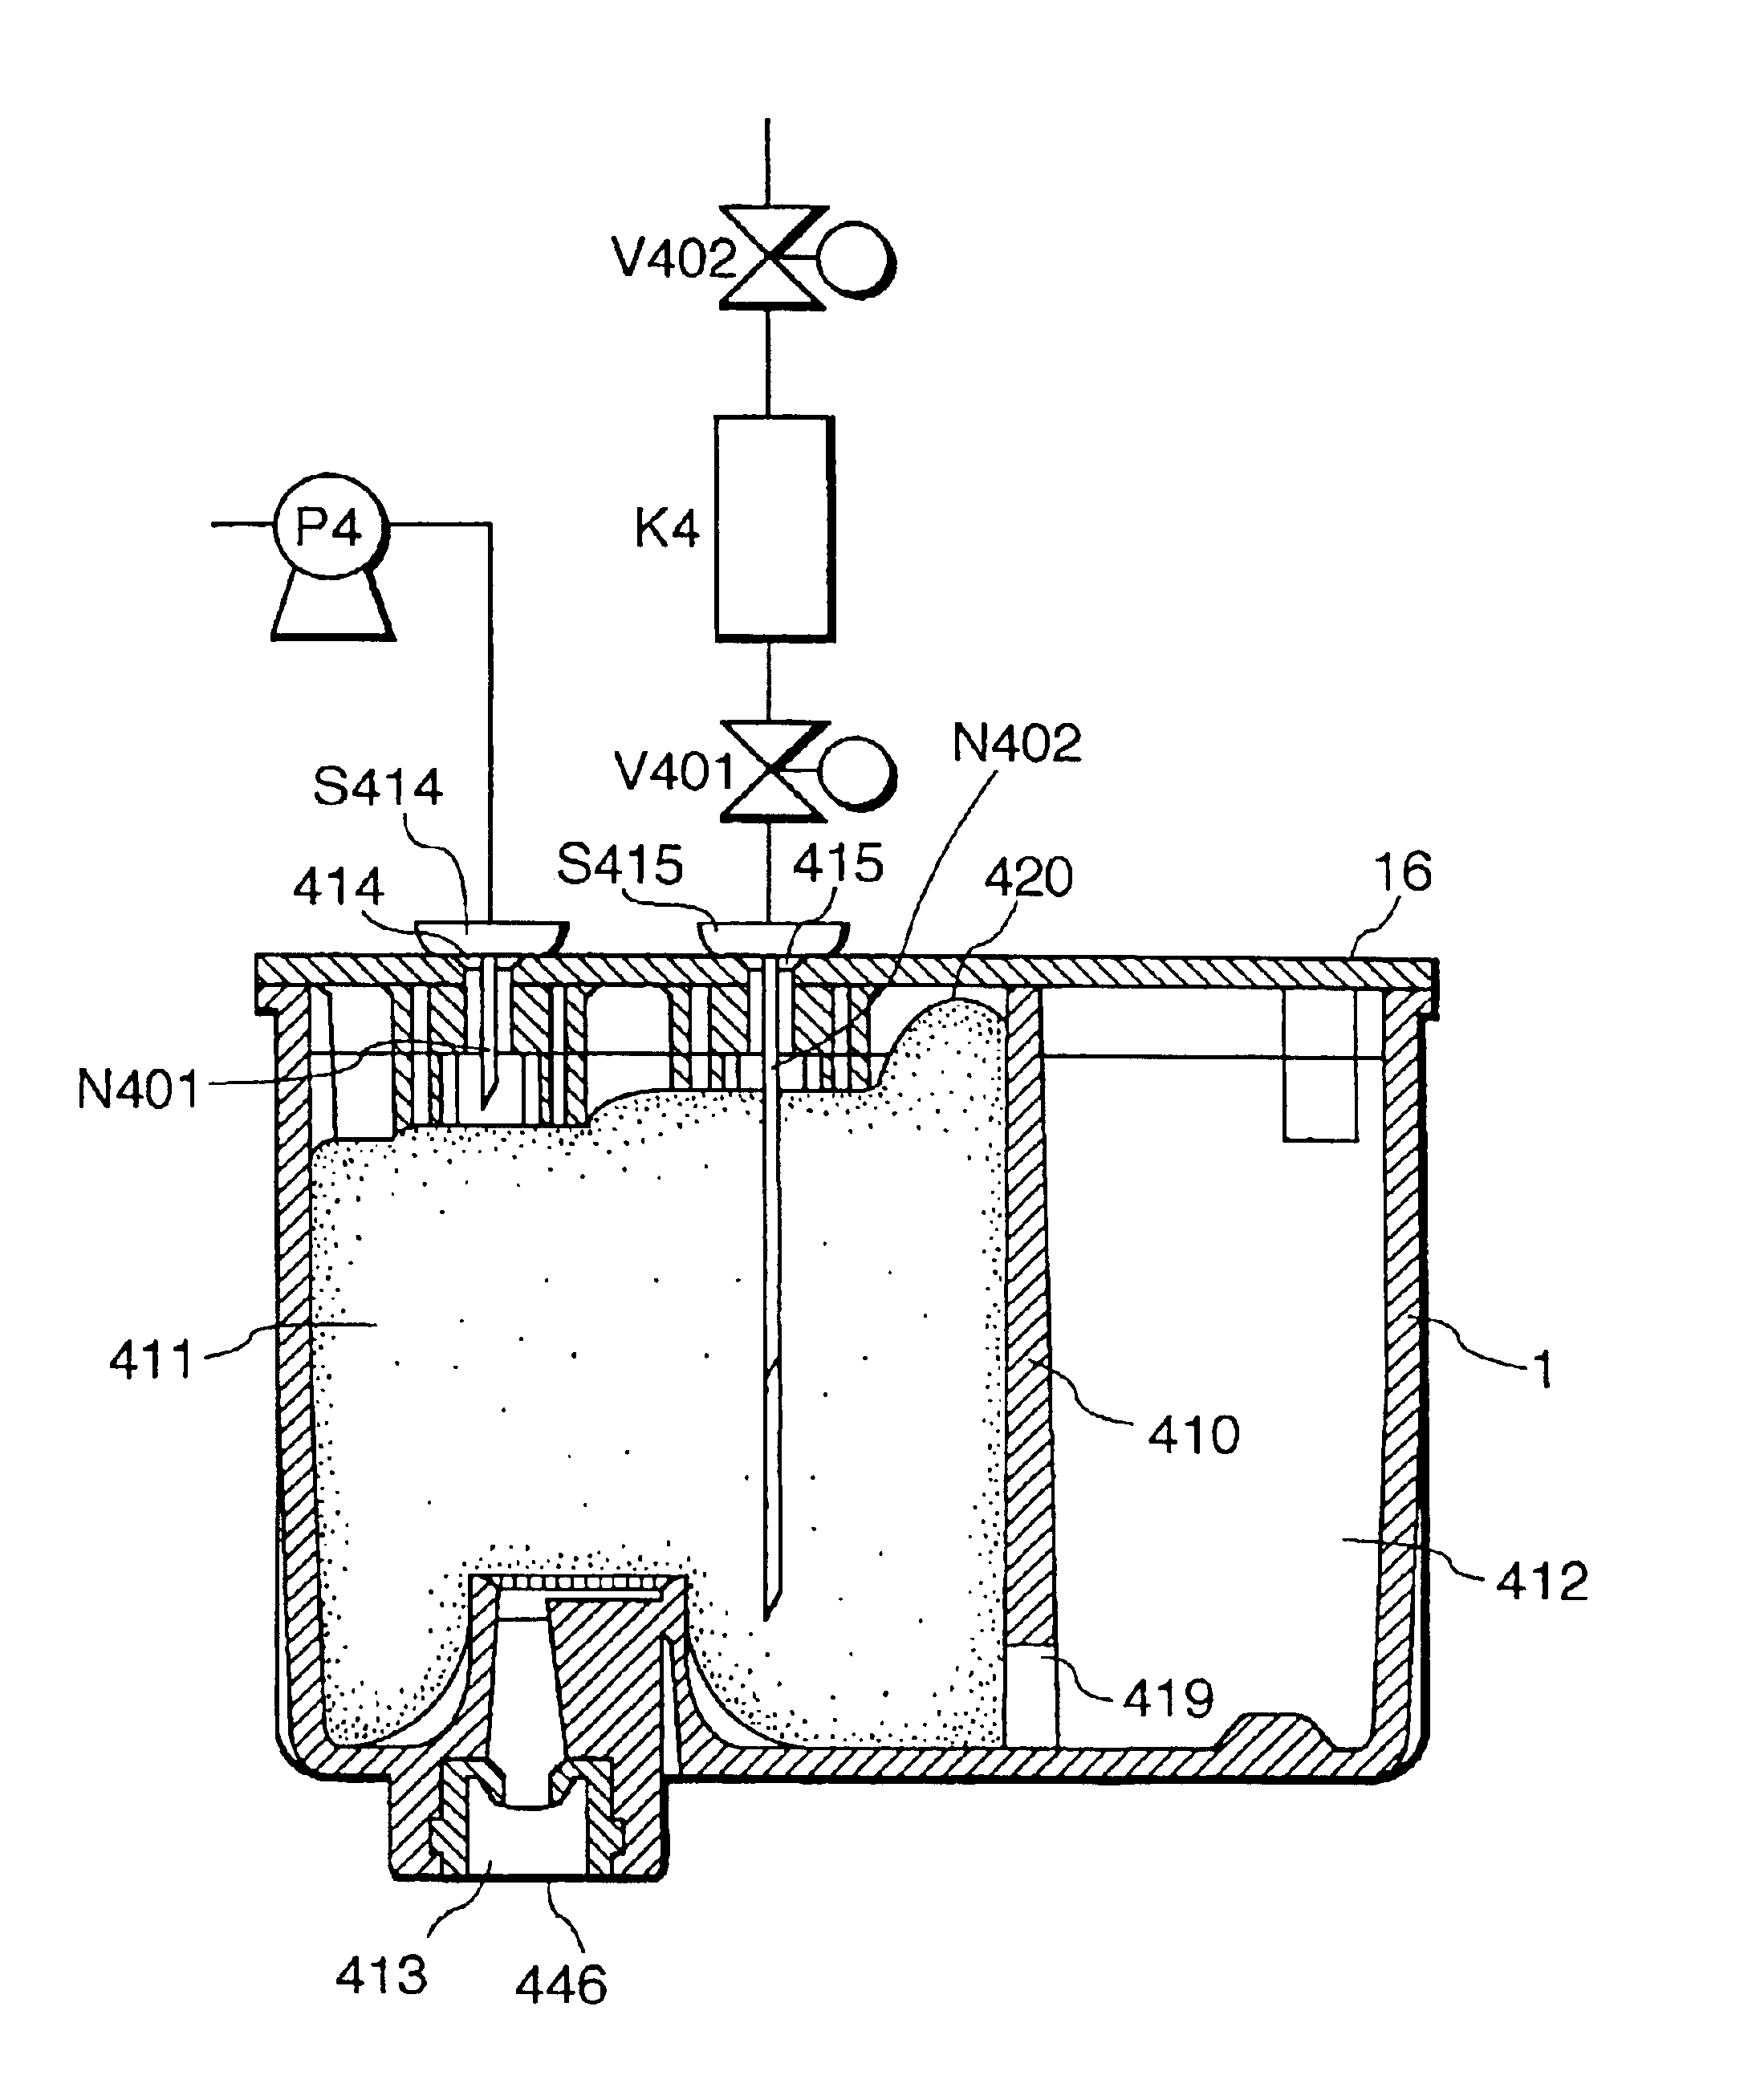 Ink cartridge for ink jet printer and method of charging ink into said cartridge